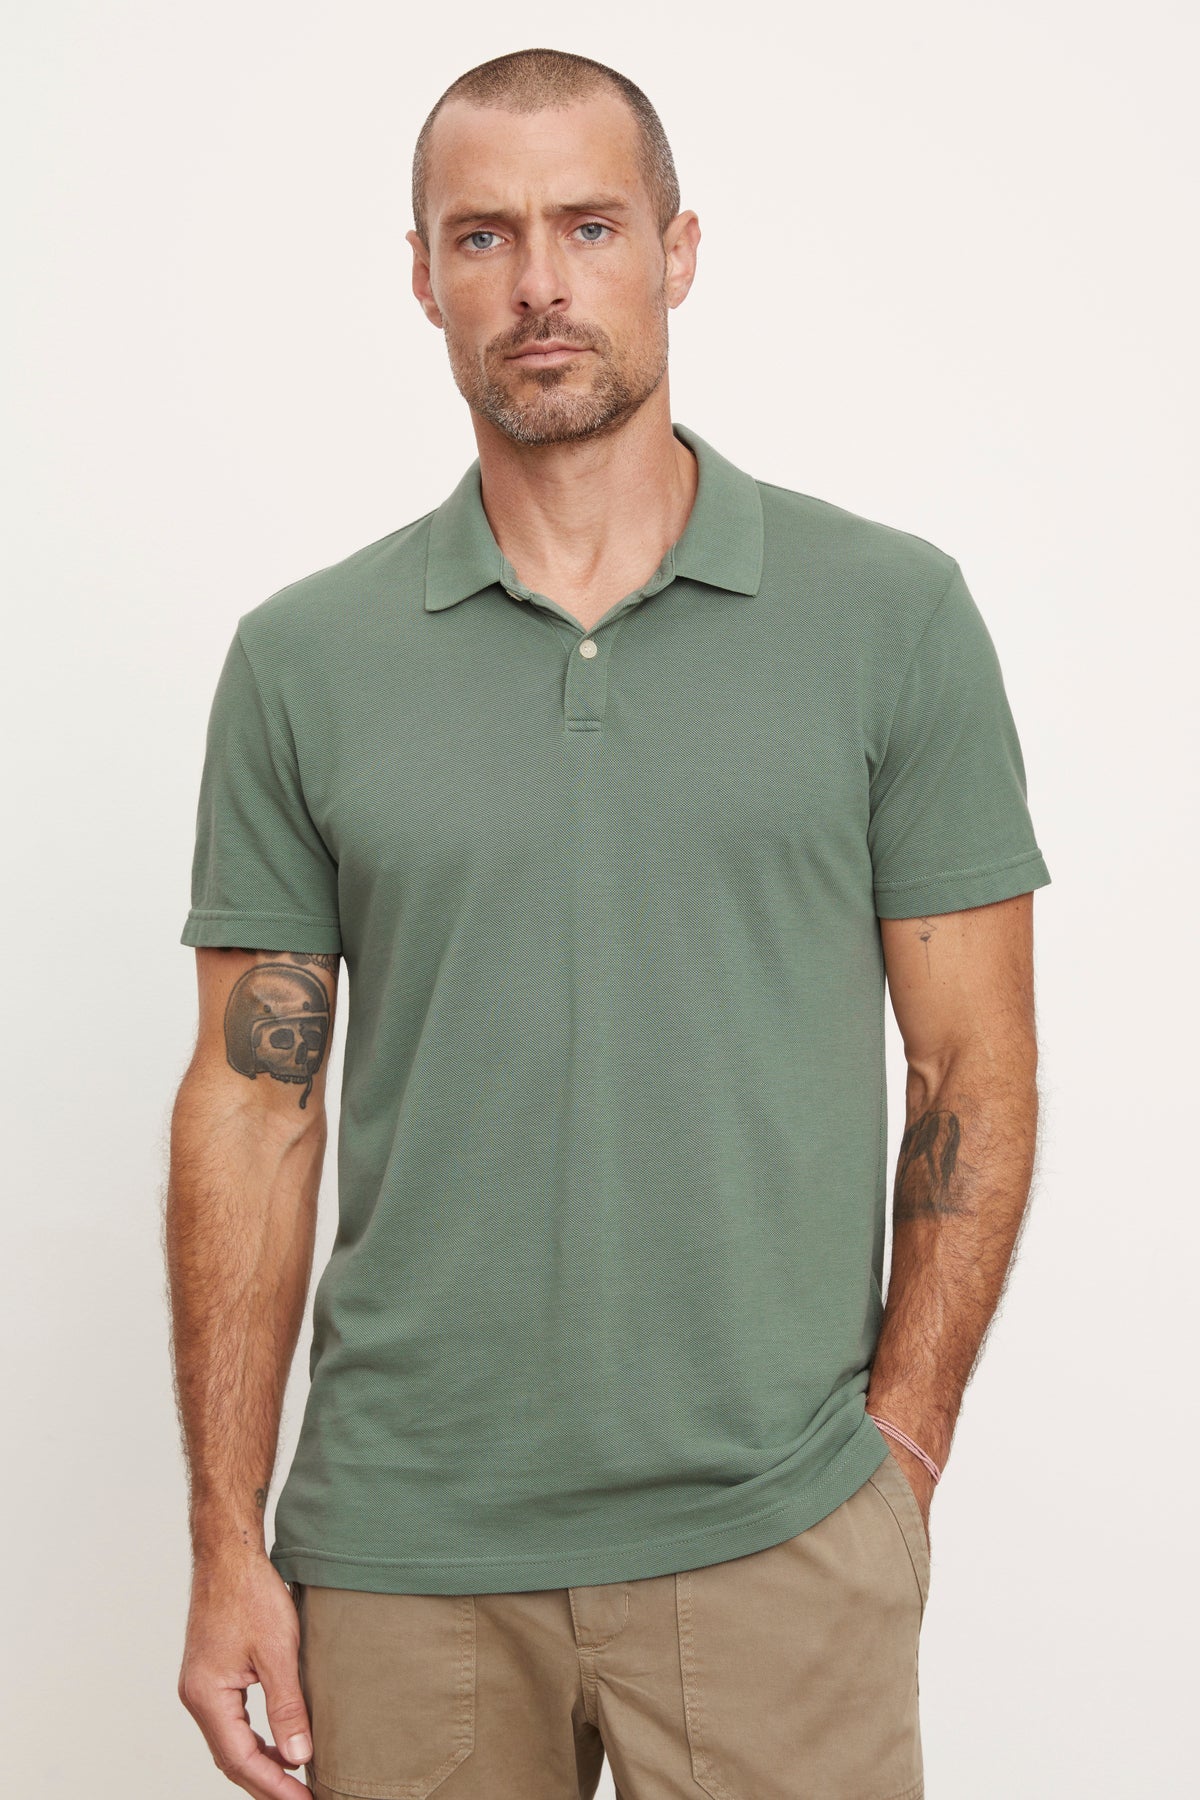 A man wearing a green Velvet by Graham & Spencer Willis Pique Polo shirt and khaki pants.-36009040249025